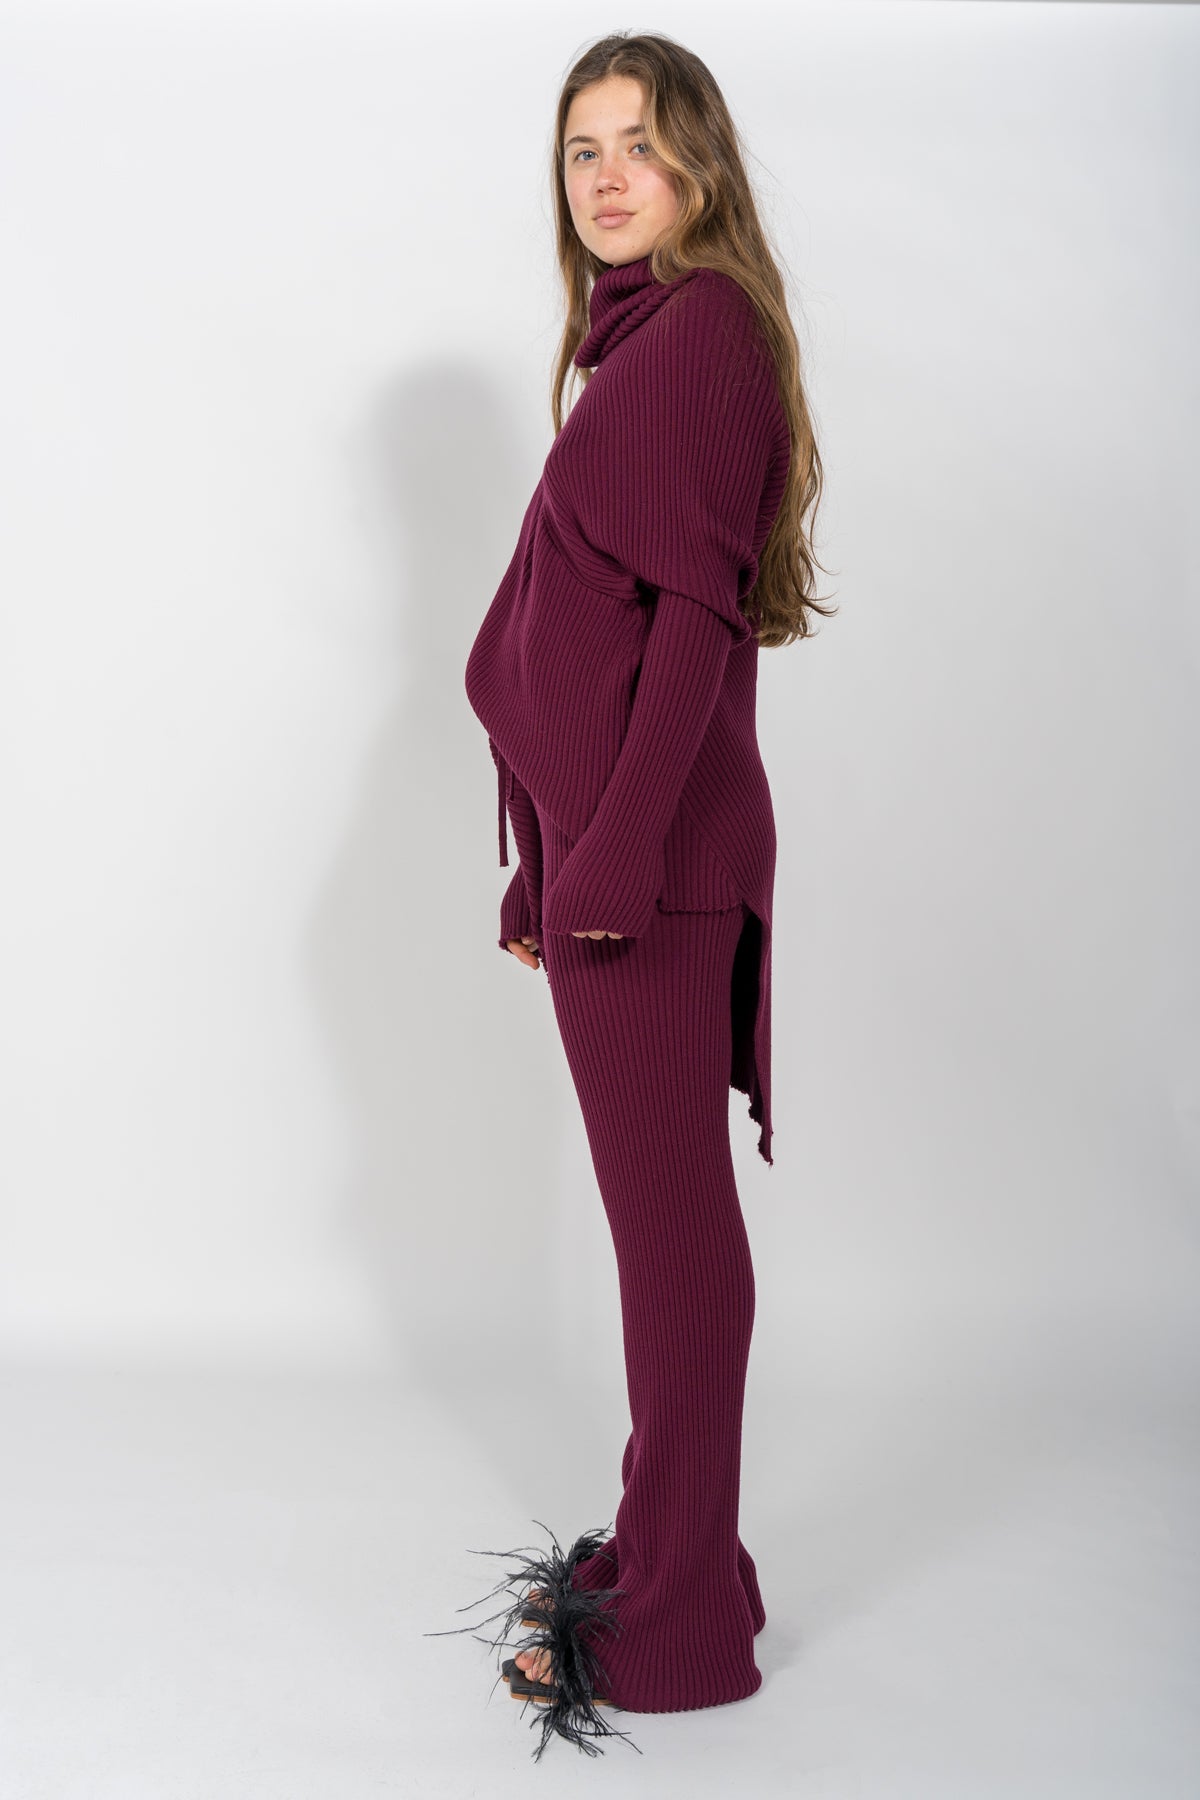 AUBERGINE KNITTED TROUSERS marques almeida